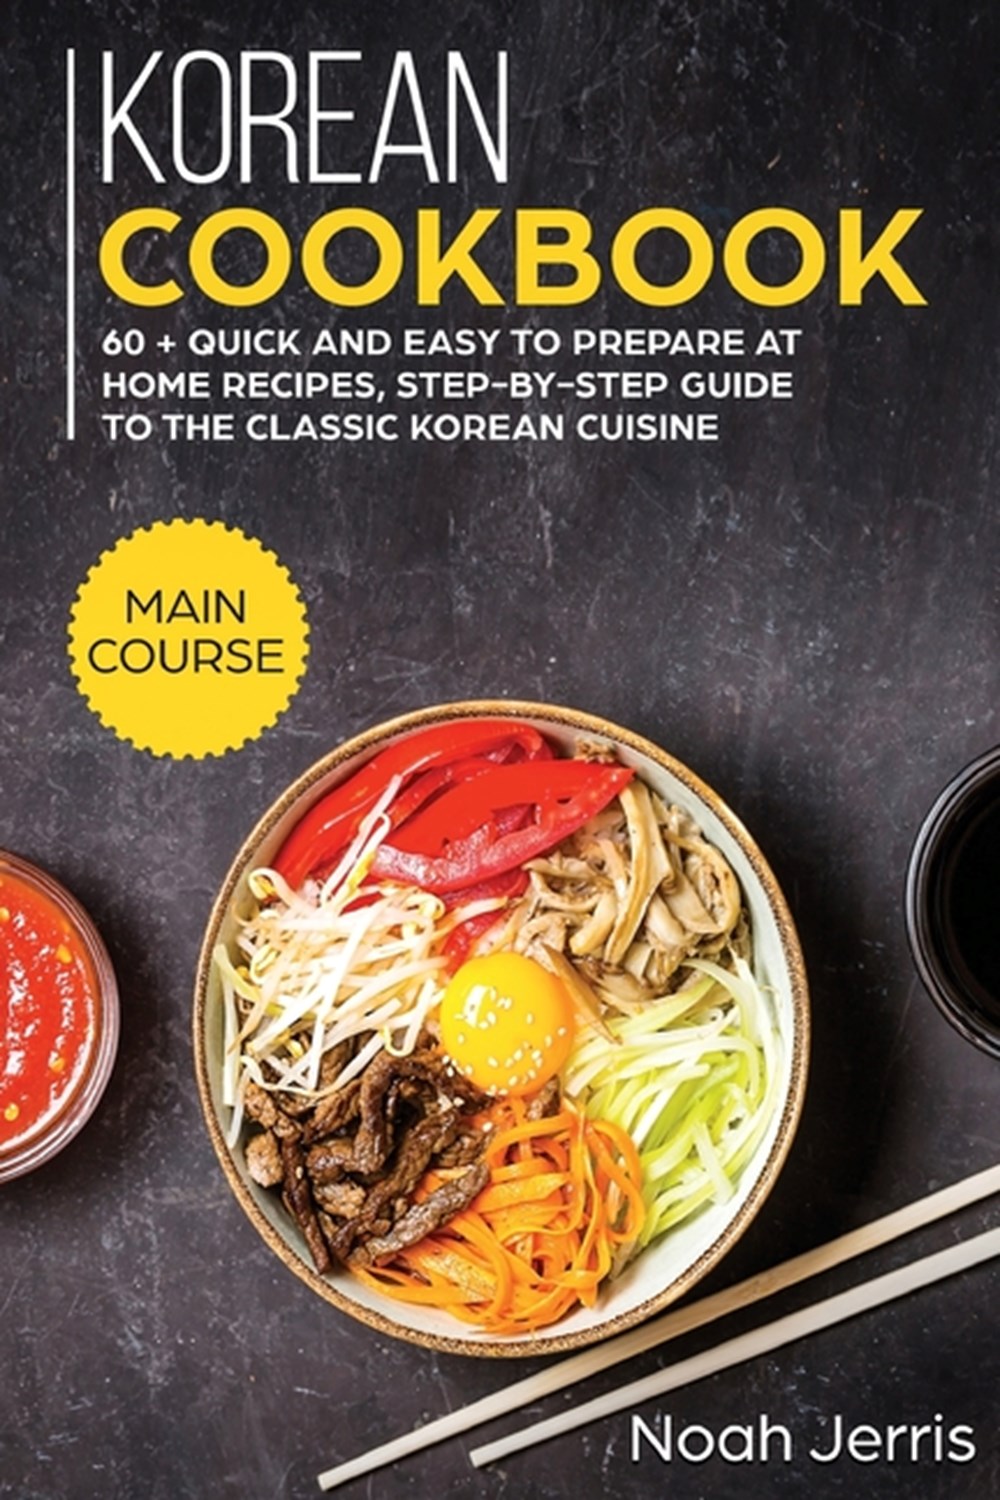 Korean Cookbook: MAIN COURSE - 60 + Quick and Easy to Prepare at Home Recipes, Step-By-step Guide to